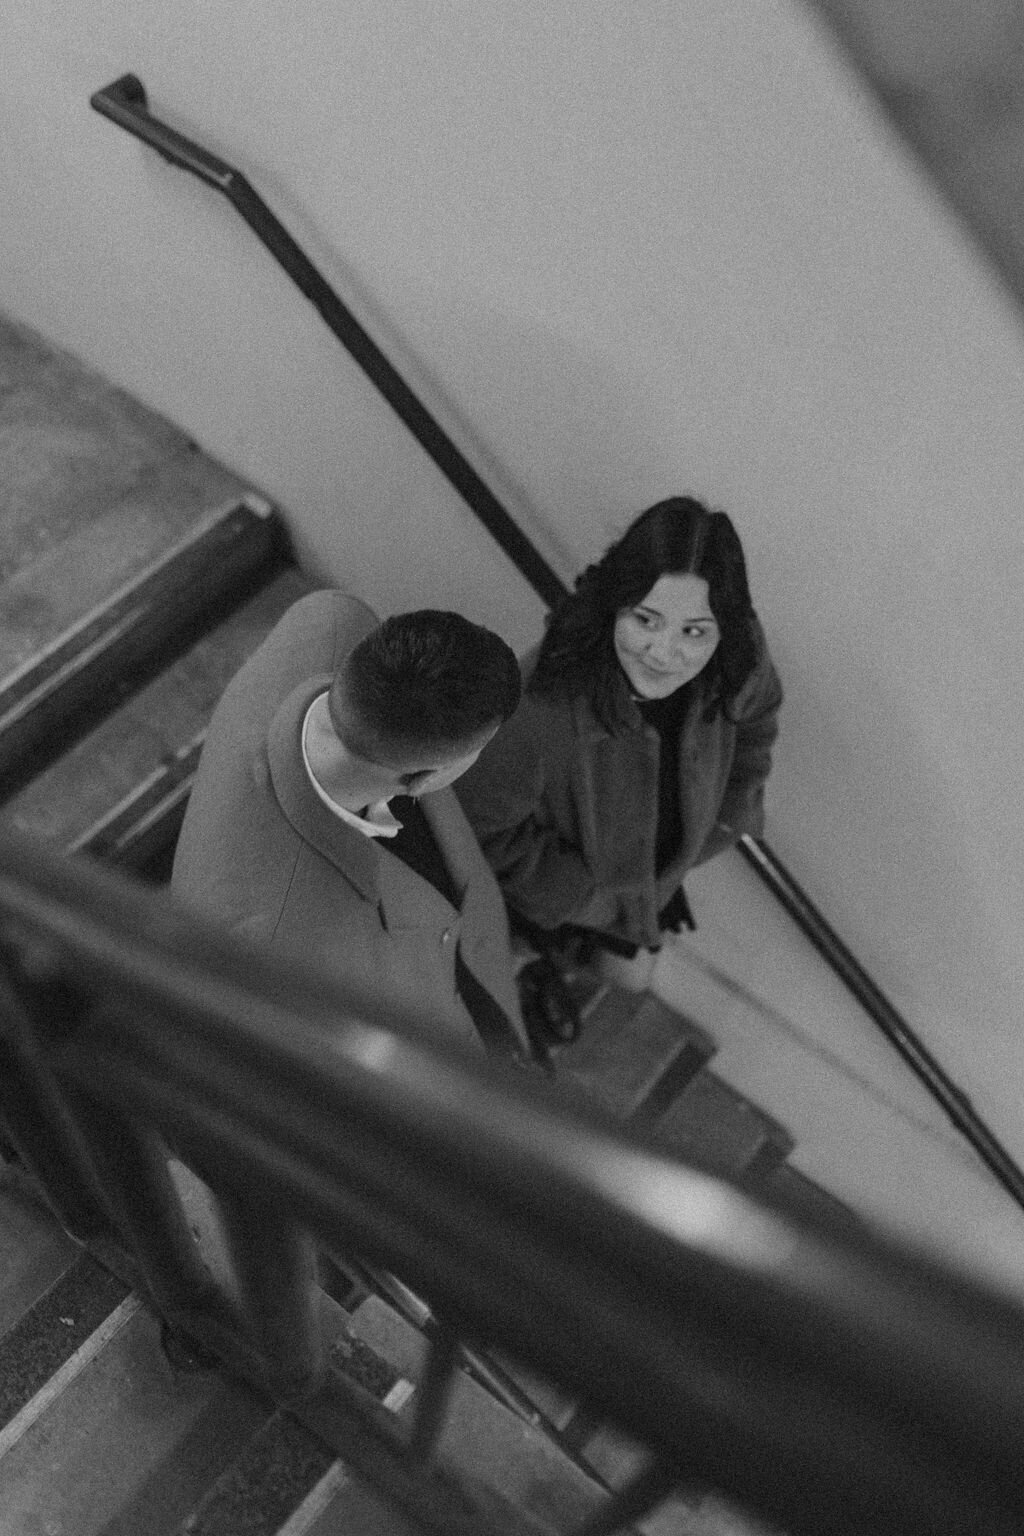 Black and white photo of couple in coats walking down industrial stairs looking sweetly at each other